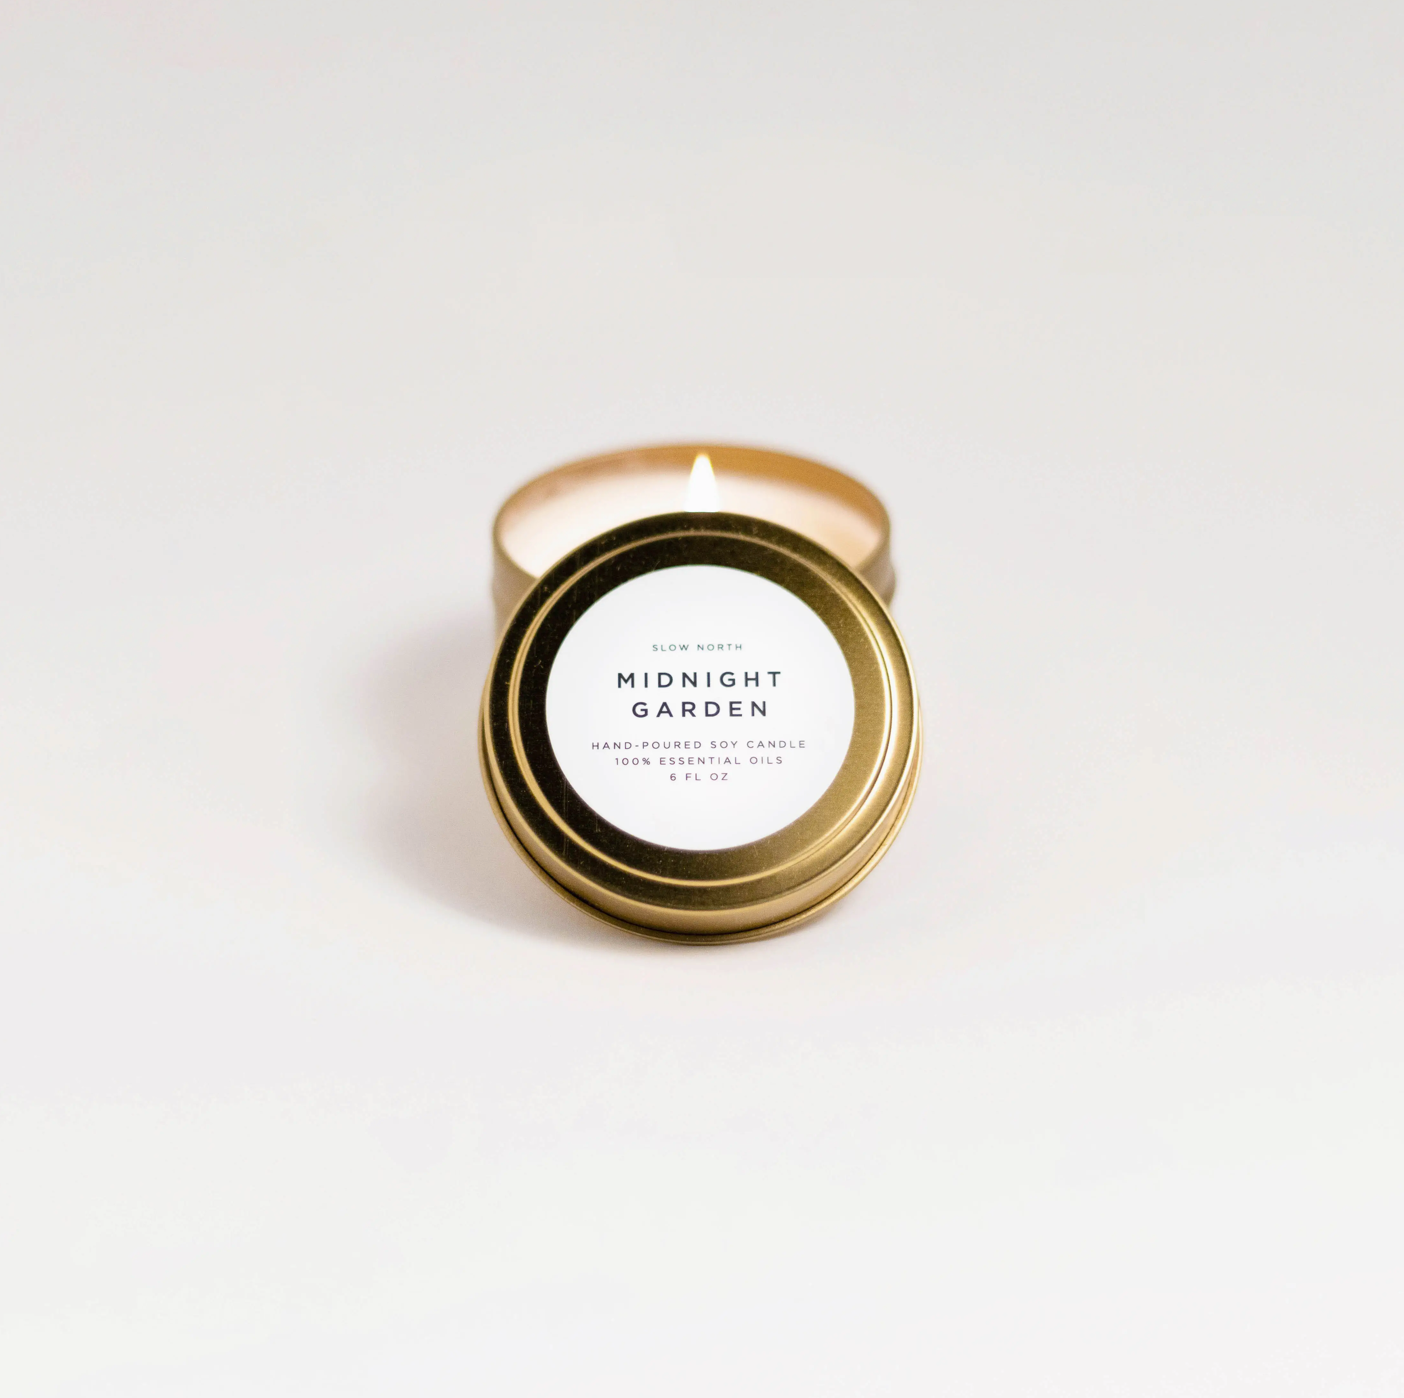 Slow North Gold Tin Candle Midnight Garden